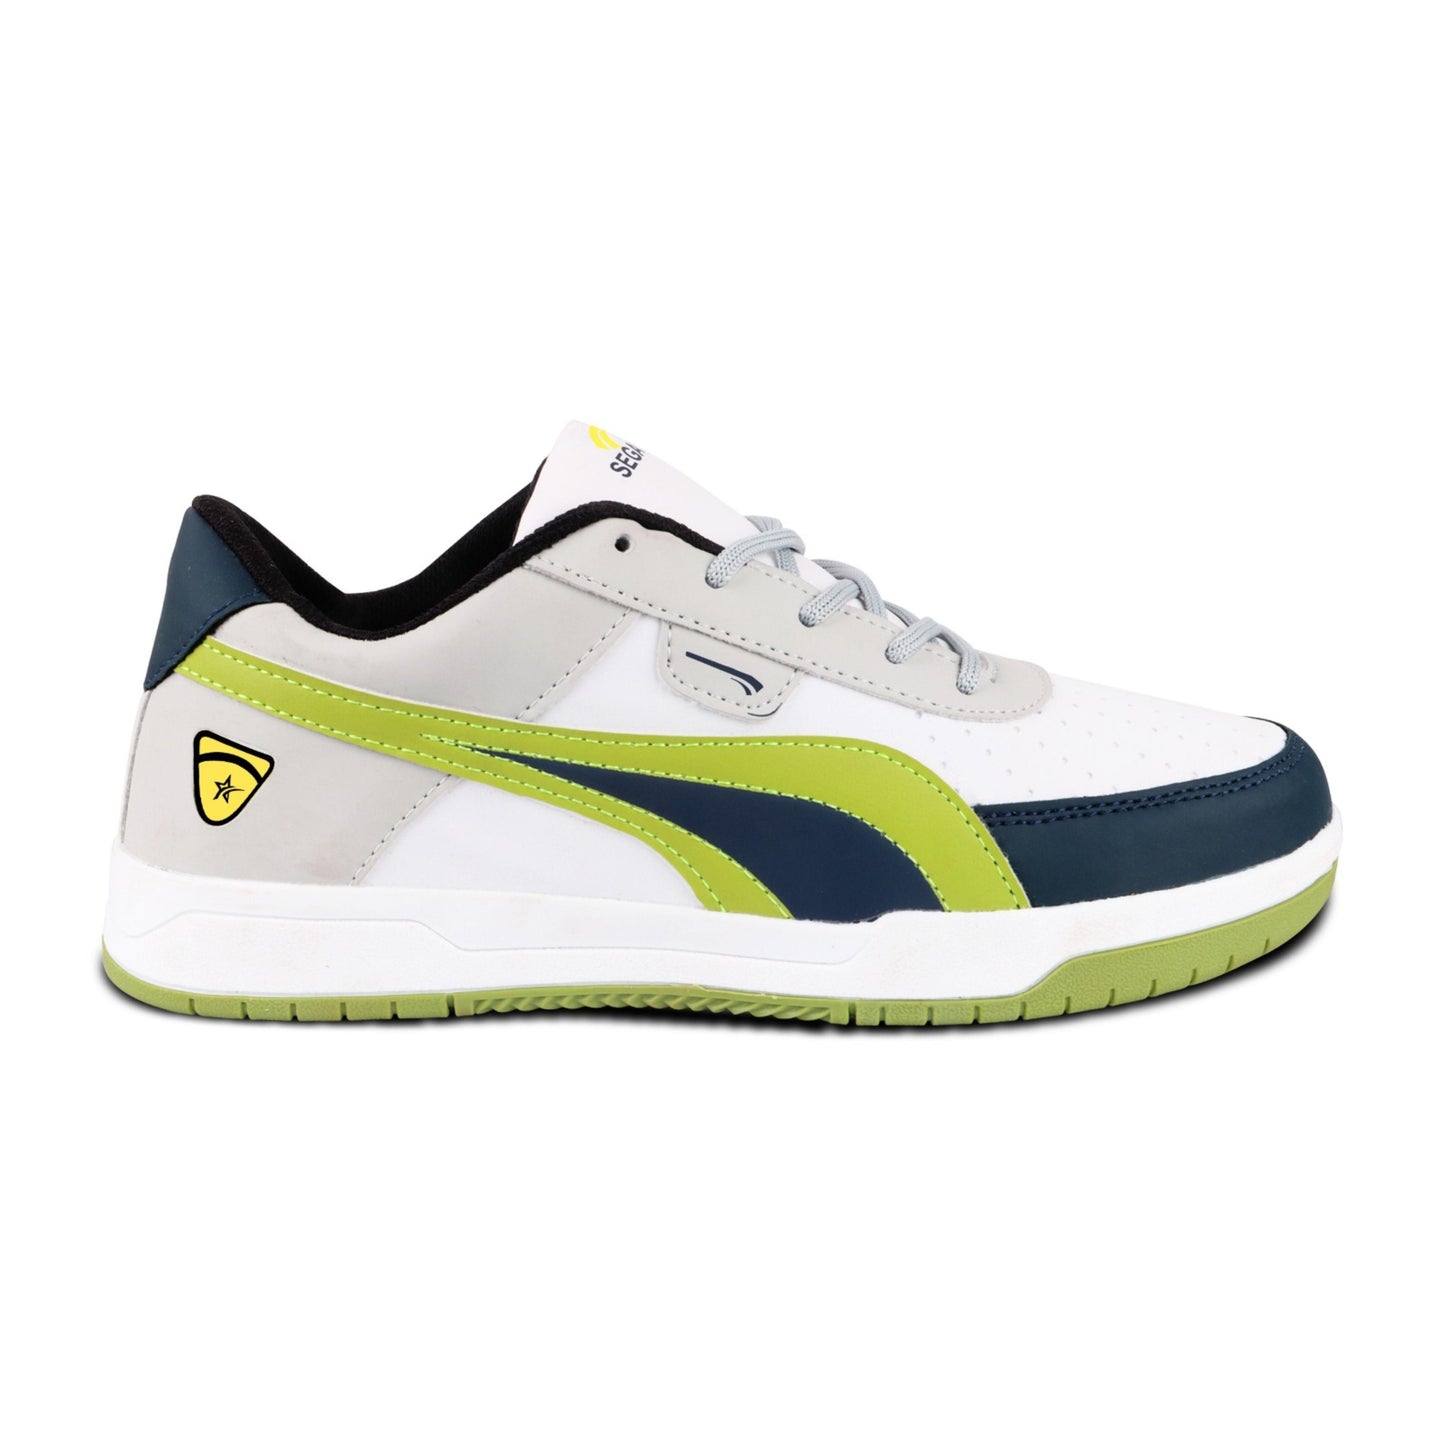 Richale Segastar White Blue and Parrot Green Mens Casual Shoes